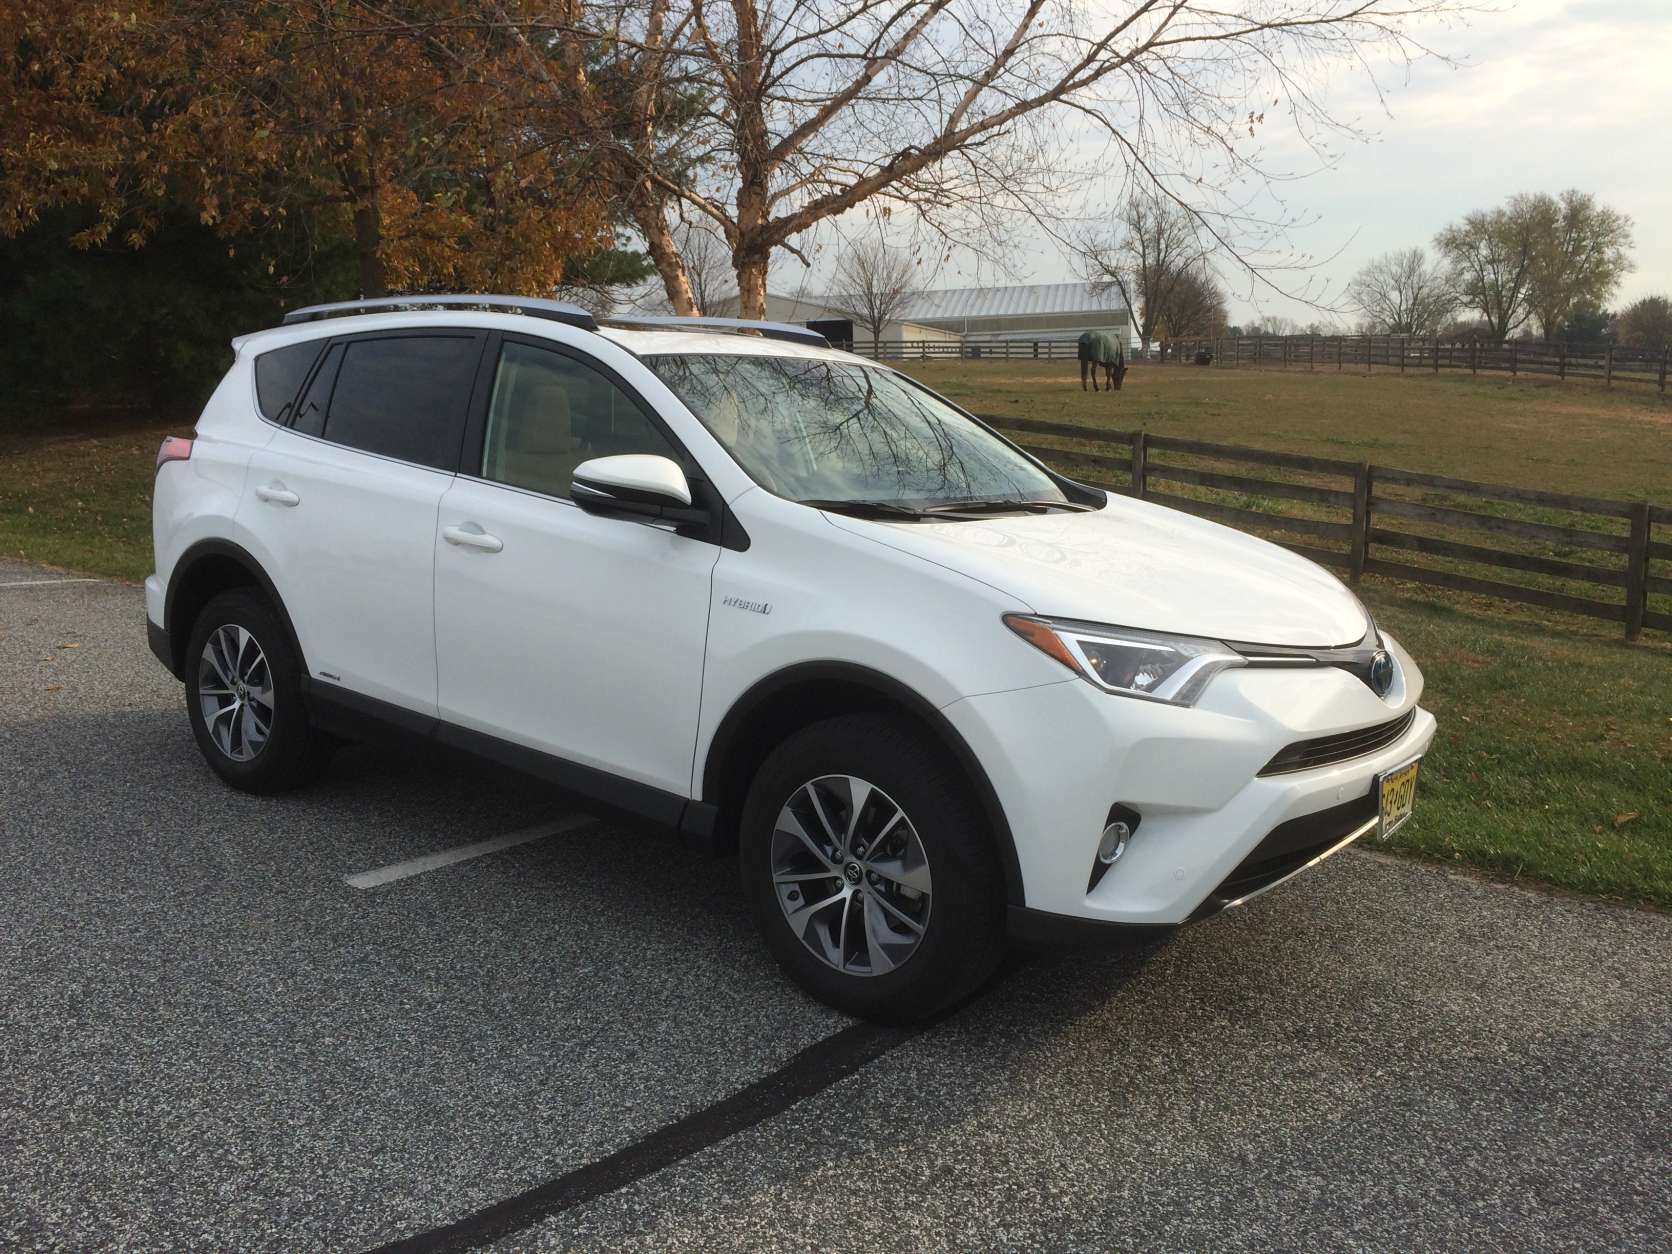 WTOP car reviewer Mike Parris says this super white tester RAV4 Hybrid really stood out. “I can’t exactly remember saying that about a RAV4 until now,” Parris says. (WTOP/Mike Parris)